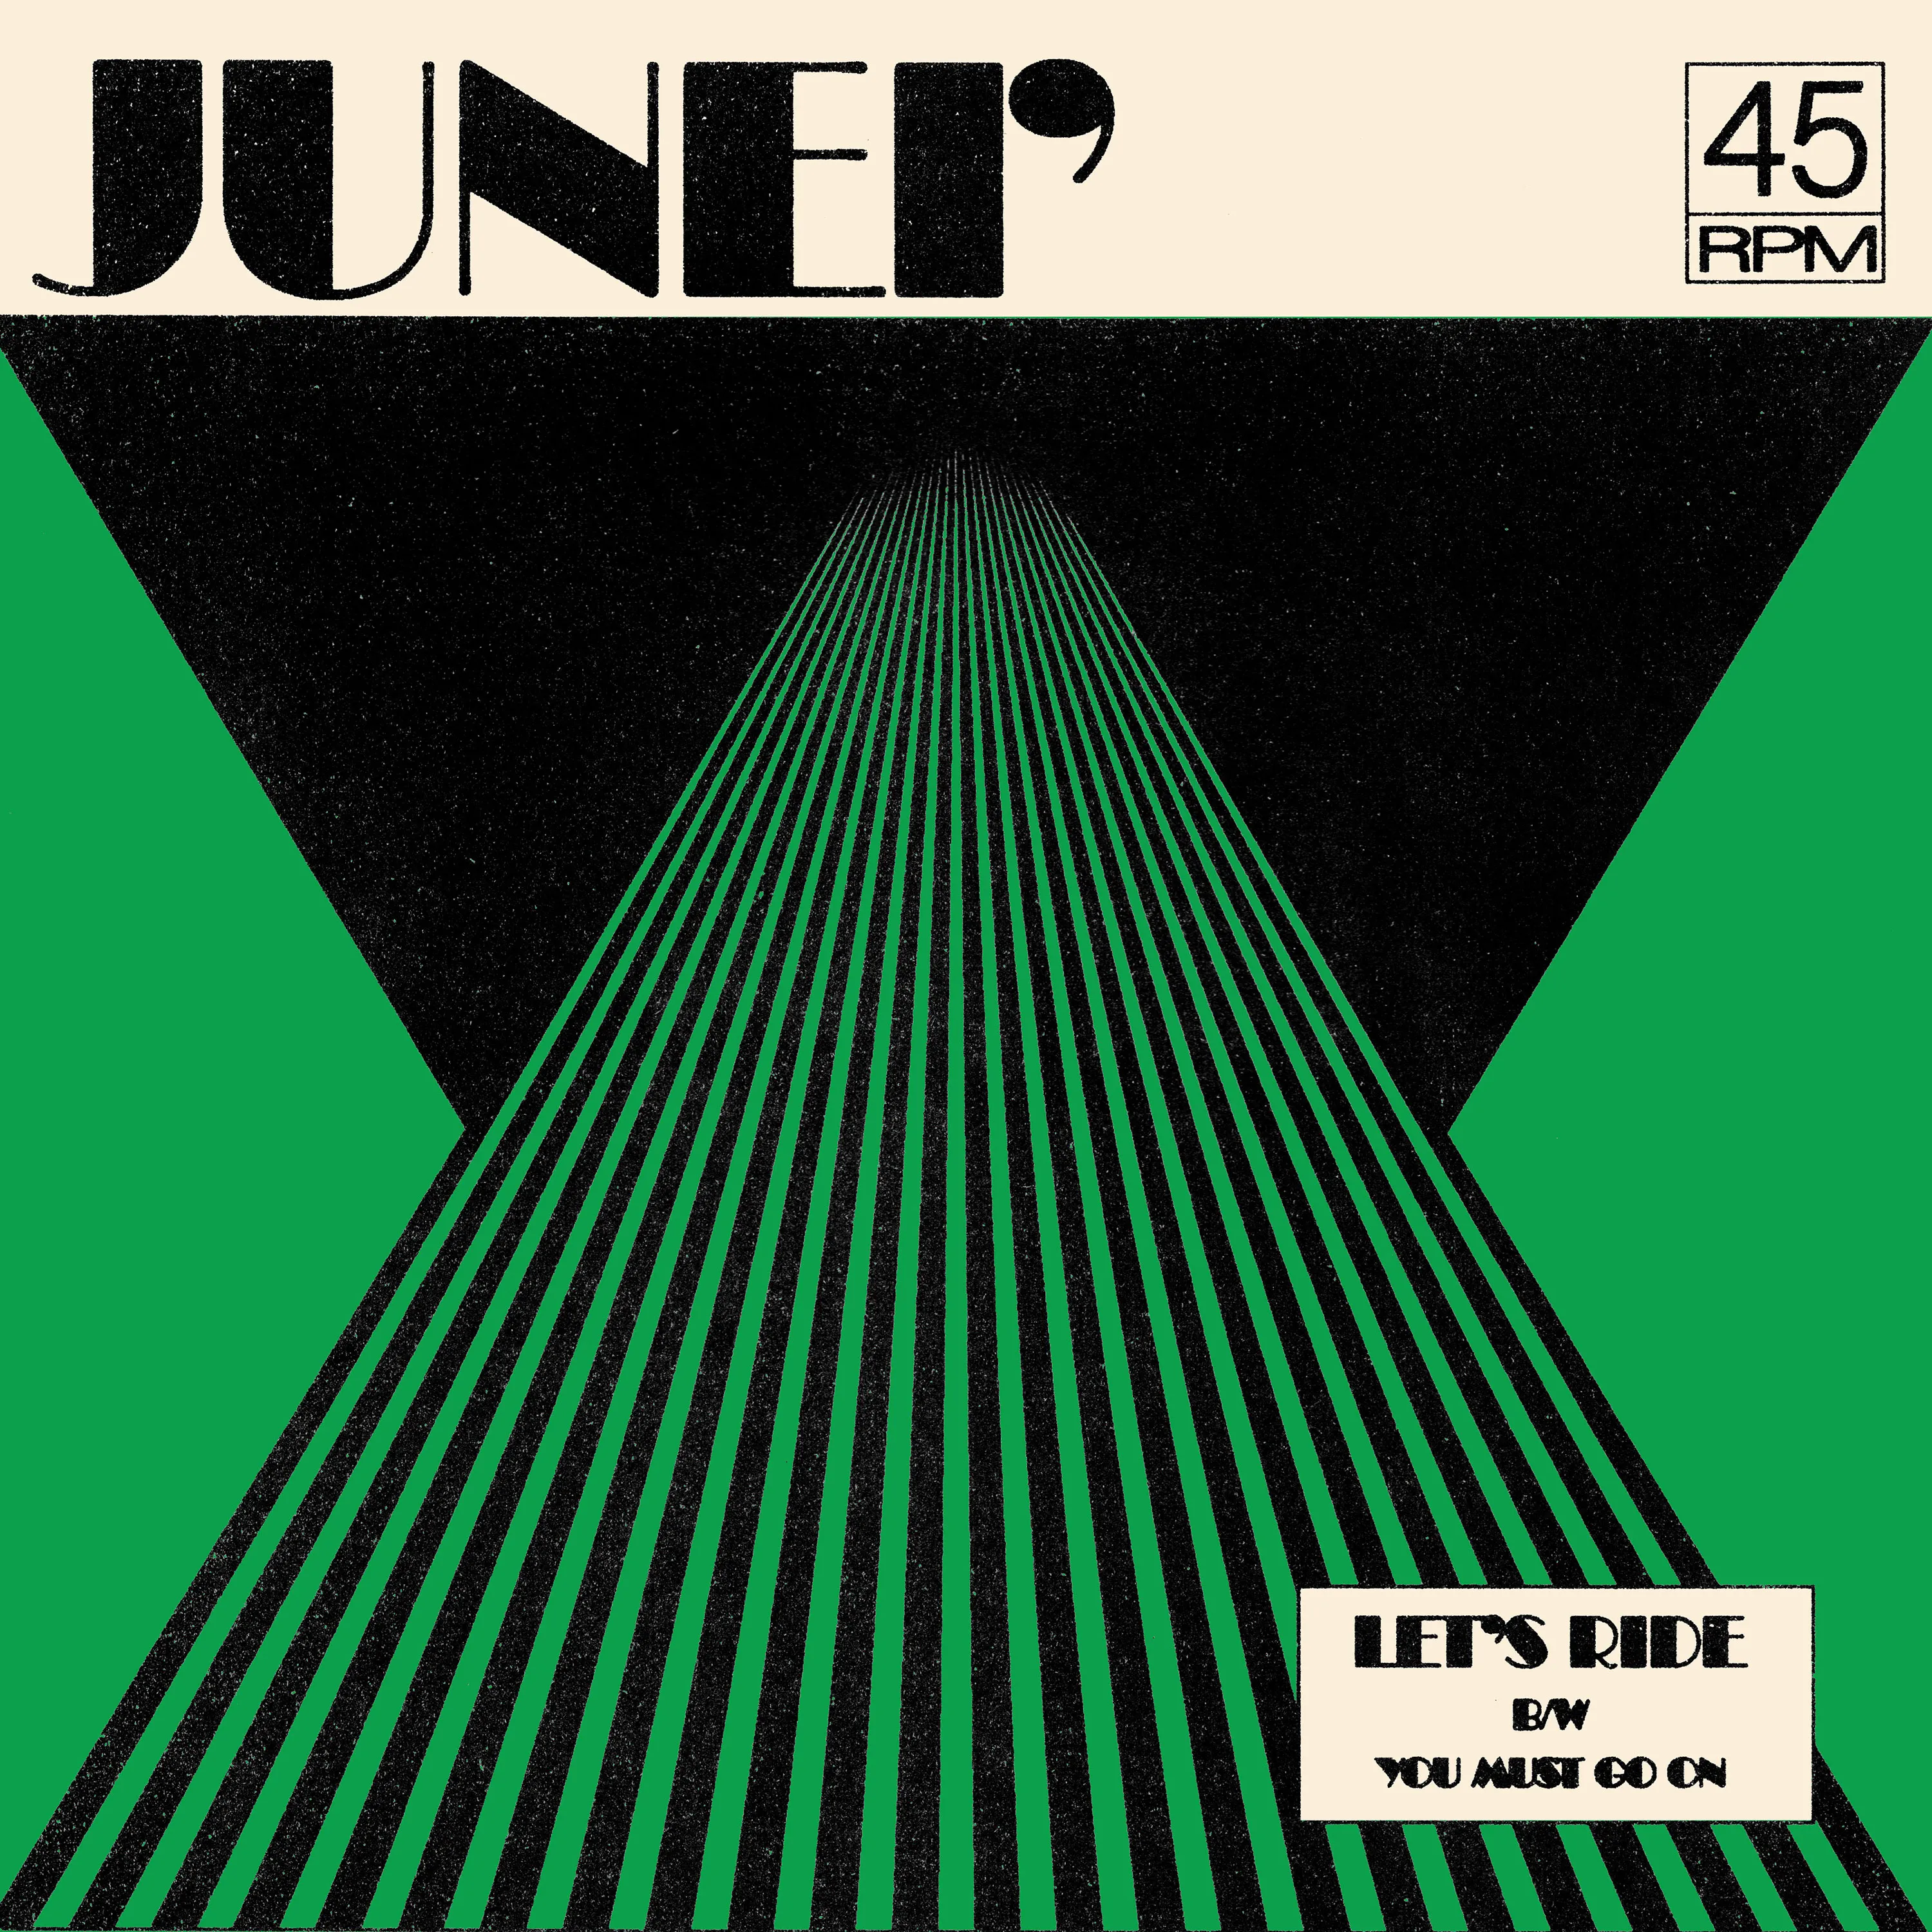 Junei' - Let's Ride b/w You Must Go On : 7inch